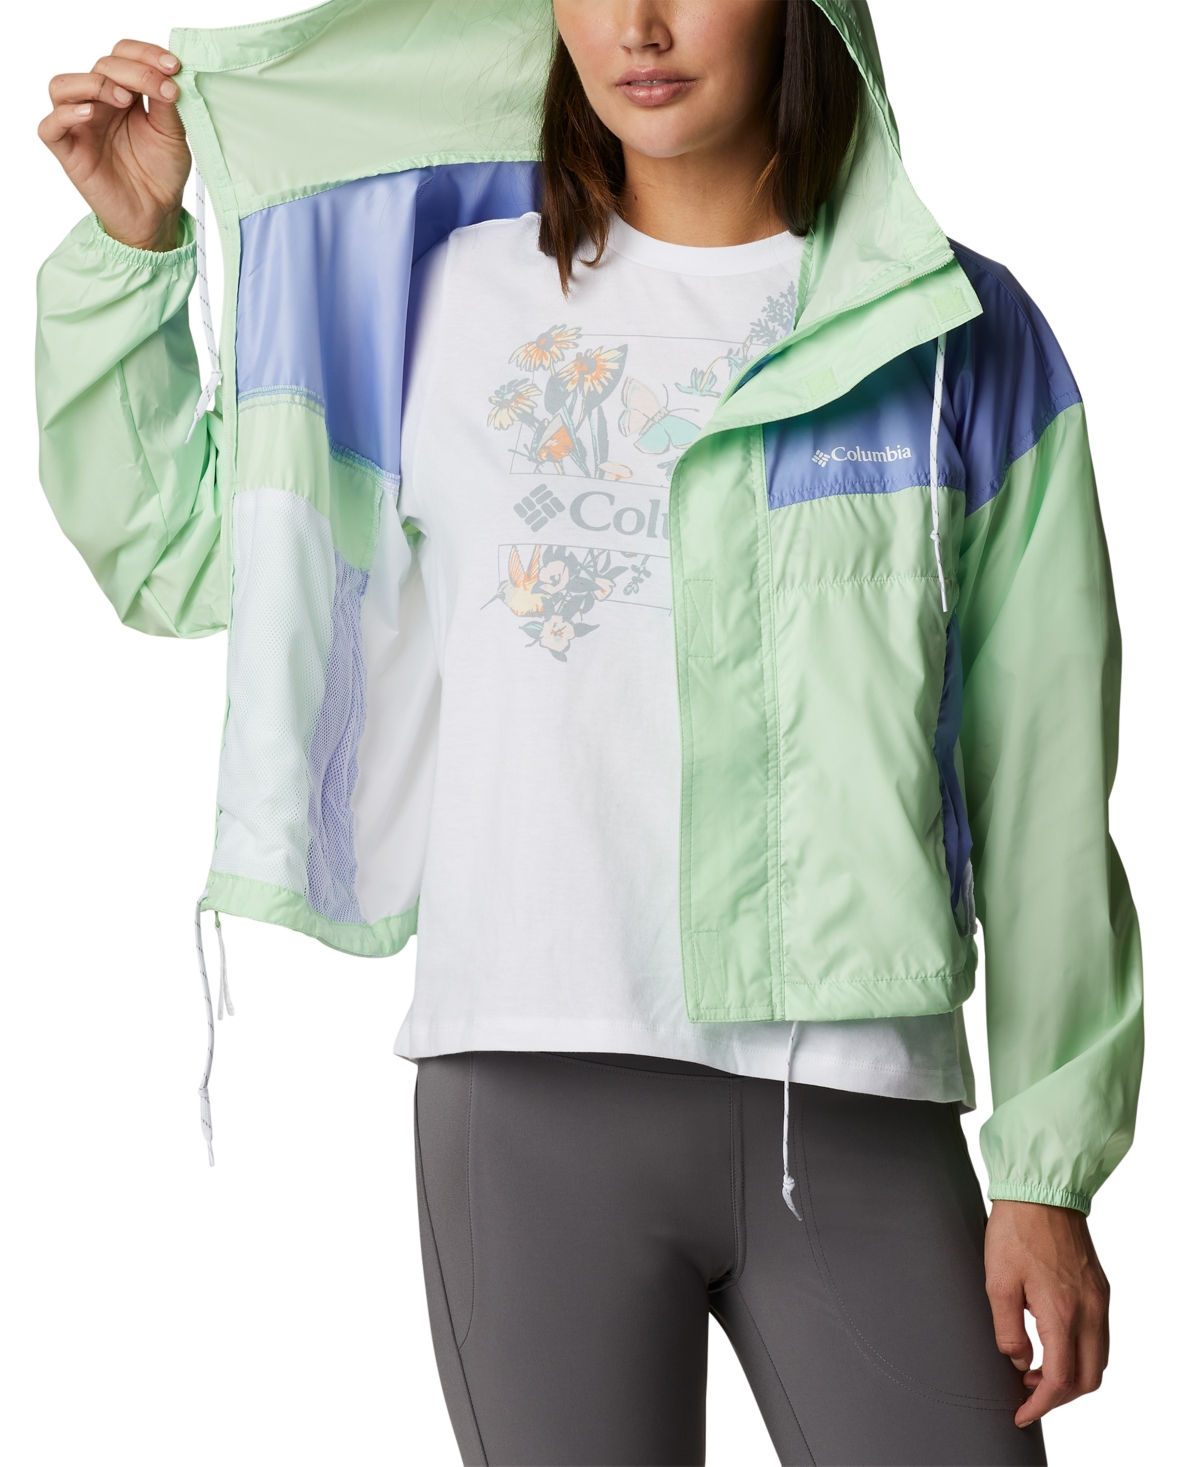 Columbia Women's Flash Challenger Cropped Jacket